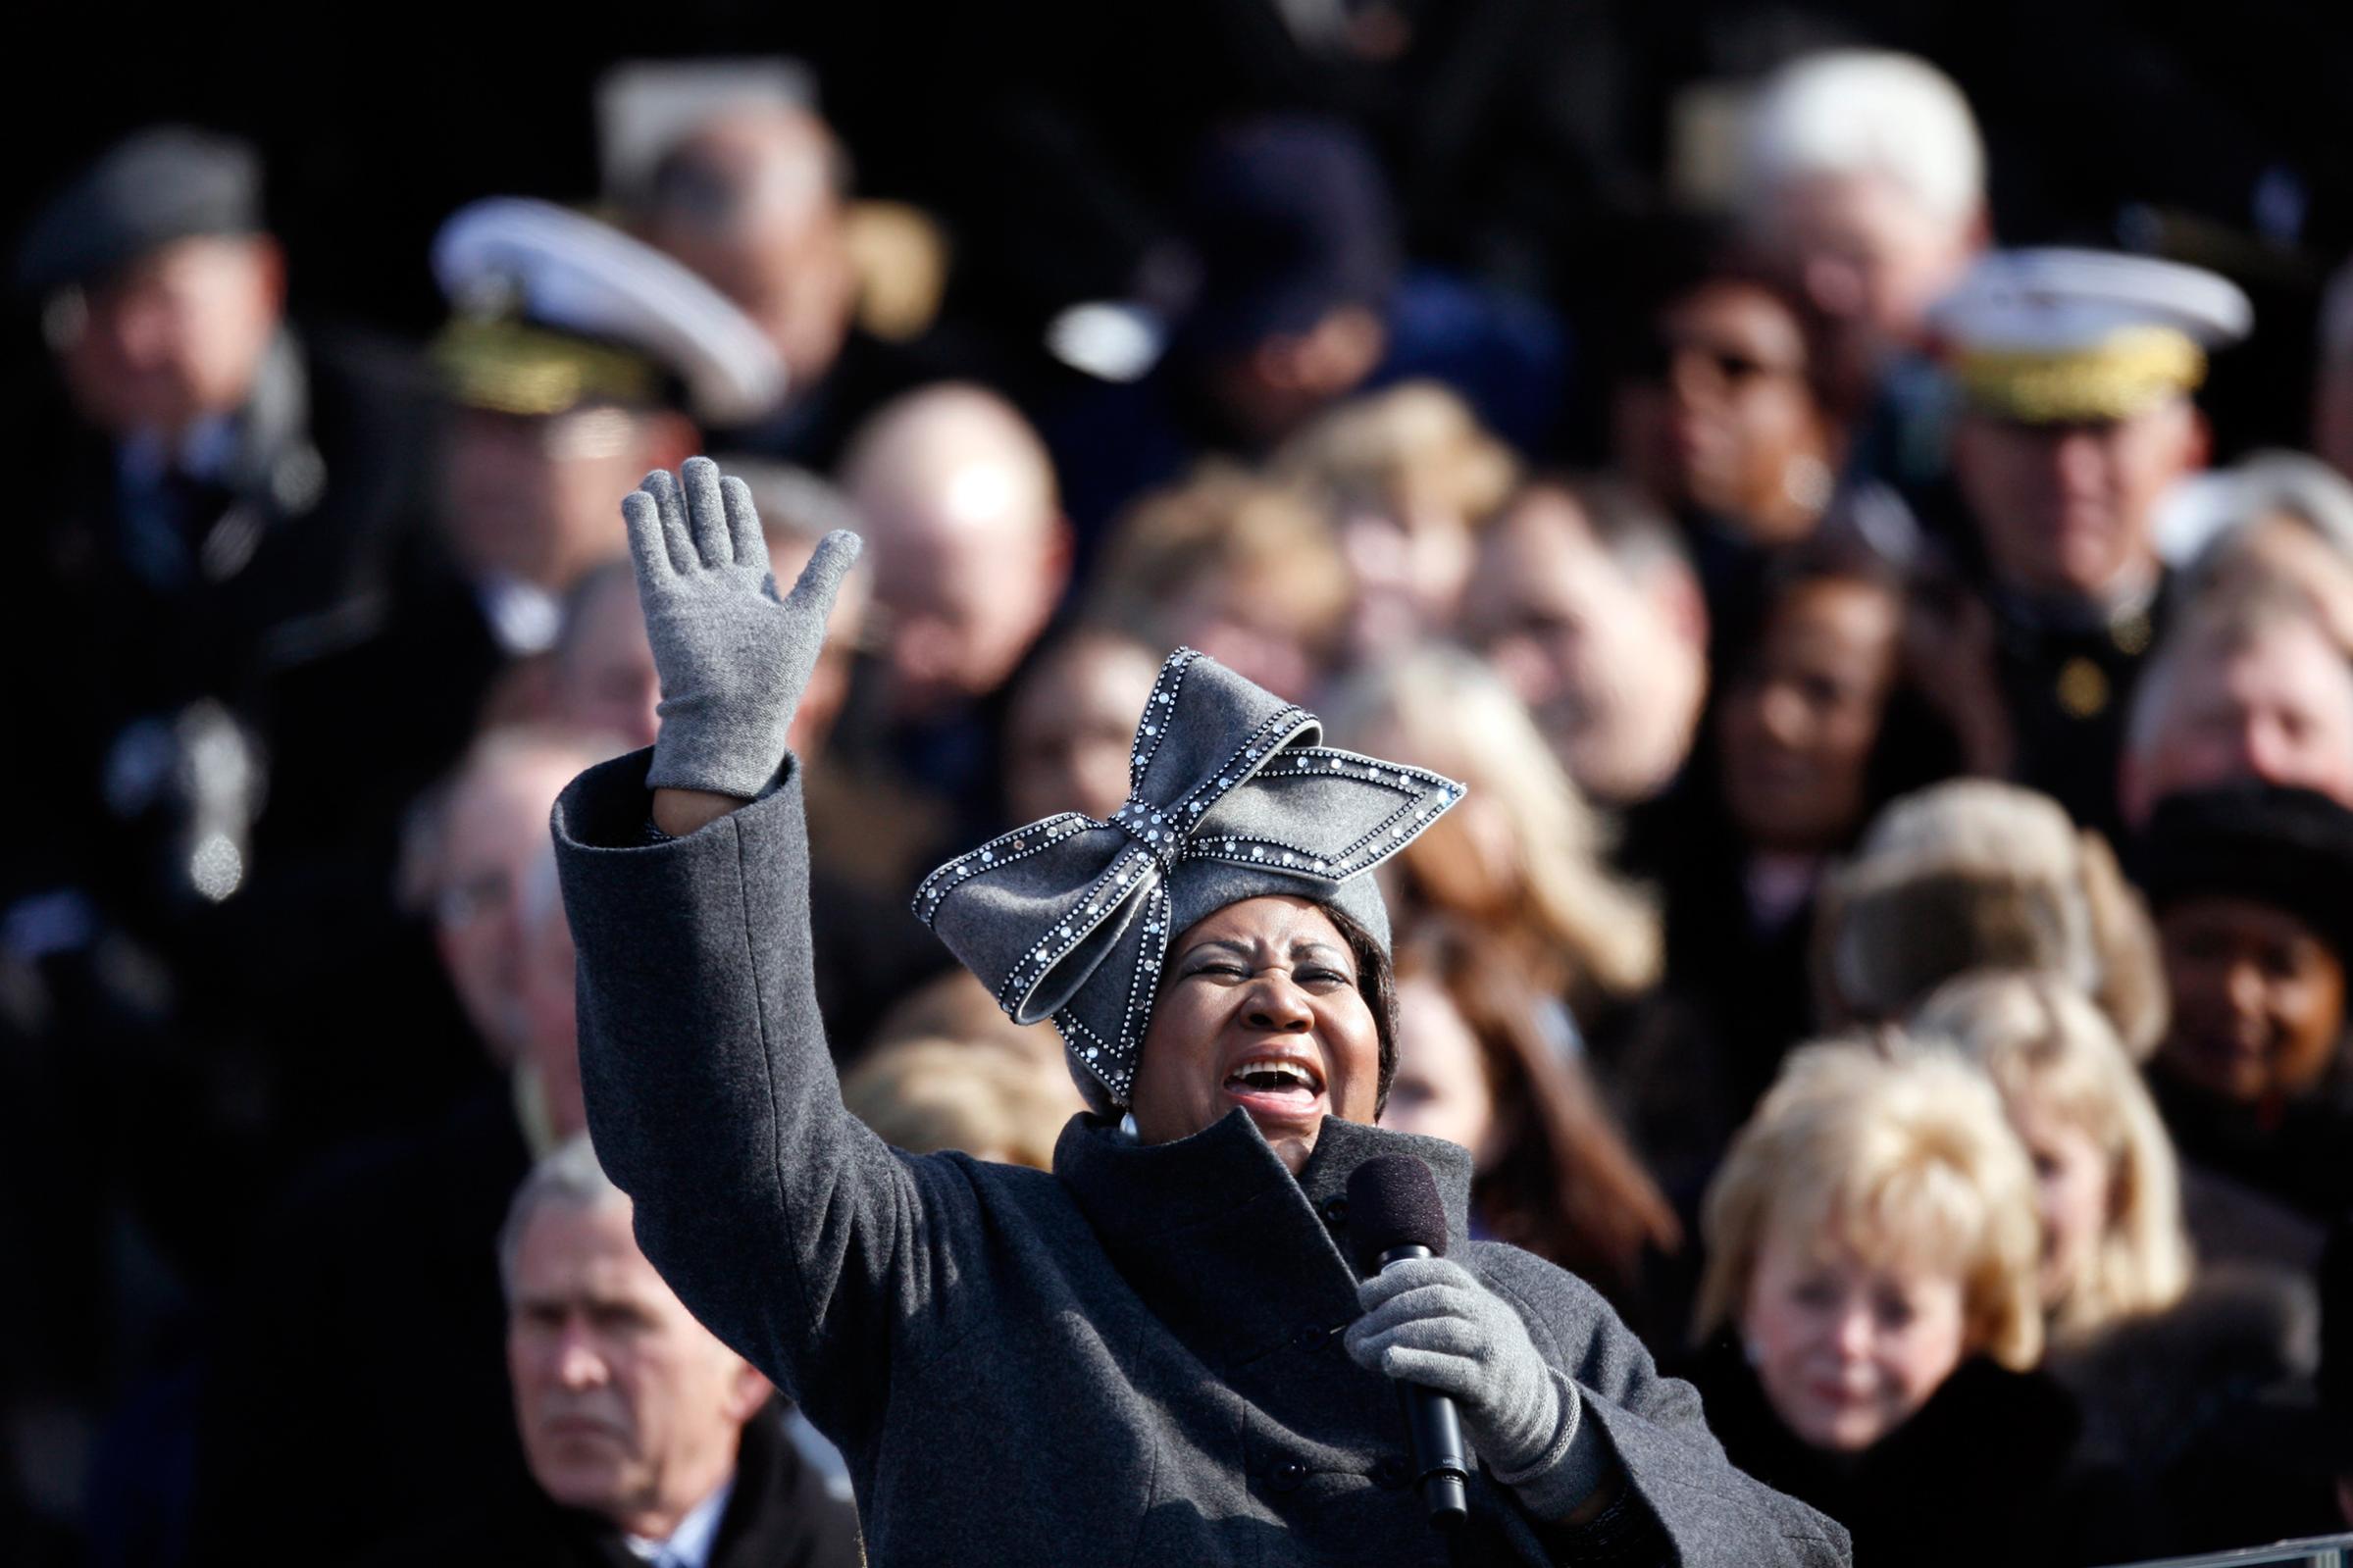 Aretha Franklin sings at the inauguration of President Barack Obama in Washington, D.C. on Jan. 20, 2009.